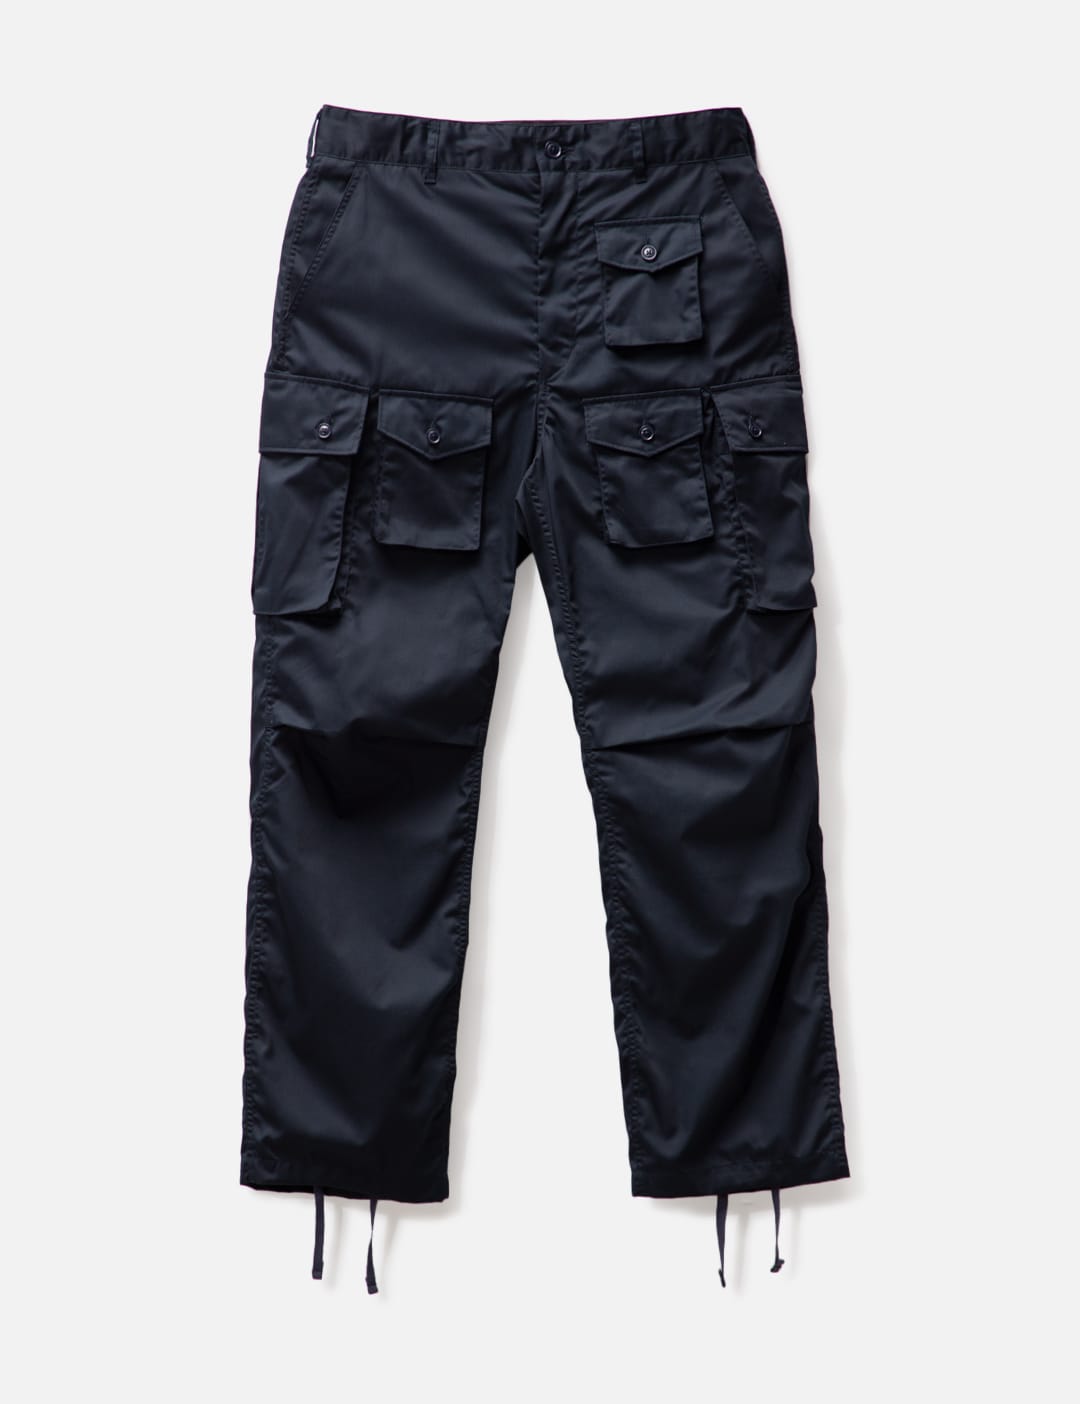 Engineered Garments   FA PANT   HBX   Globally Curated Fashion and